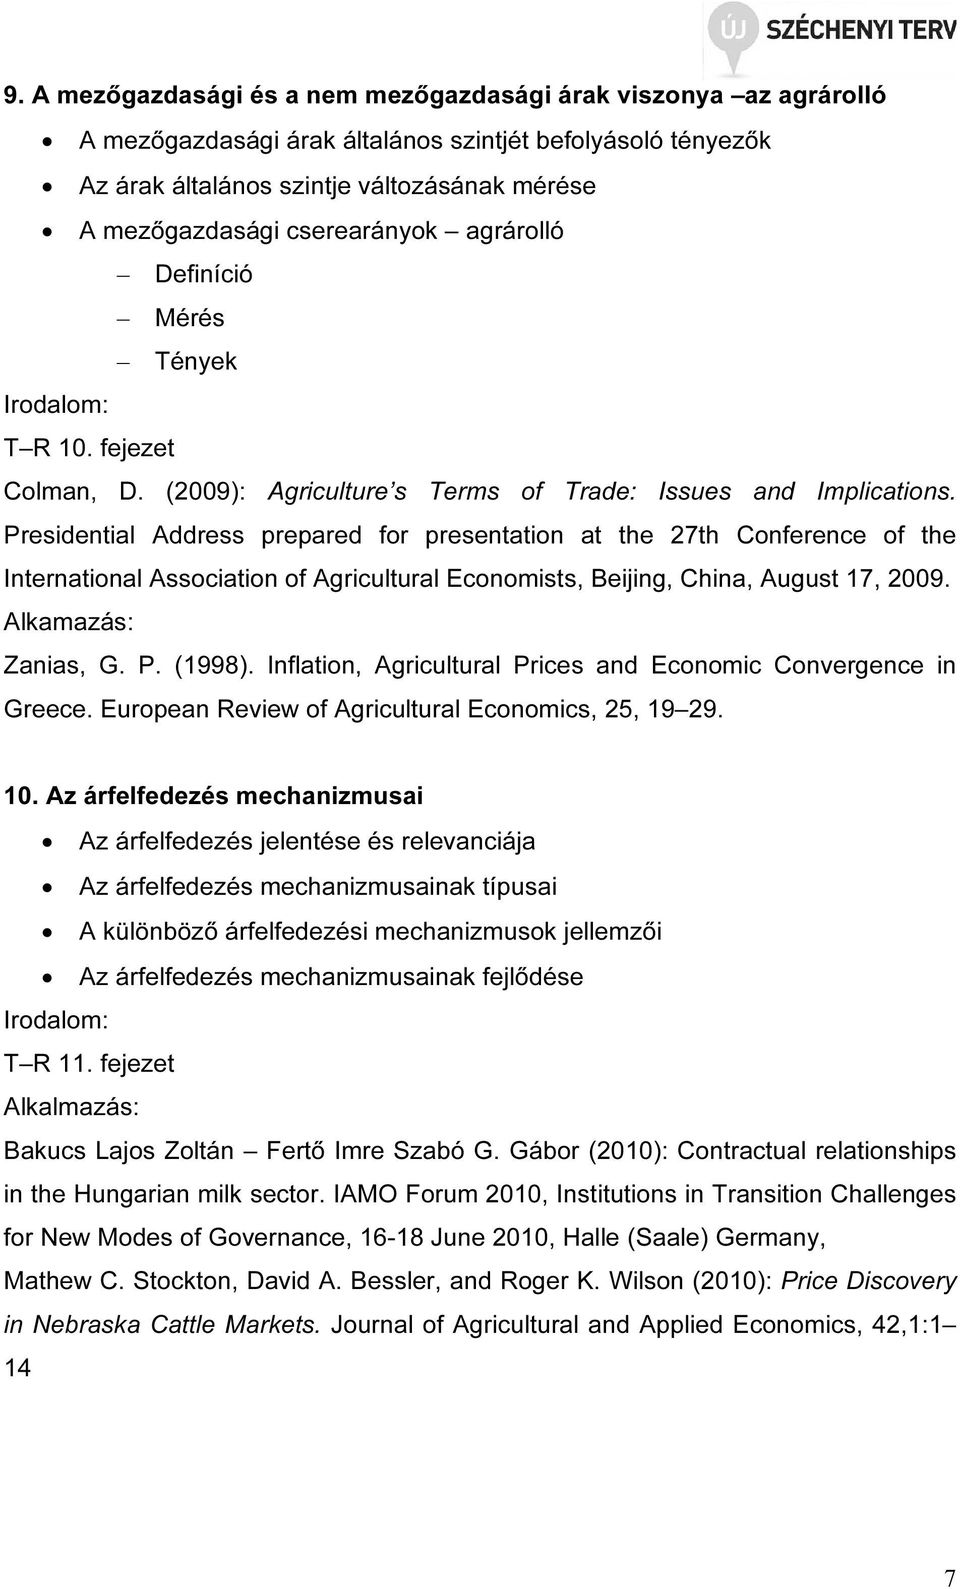 Presidential Address prepared for presentation at the 27th Conference of the International Association of Agricultural Economists, Beijing, China, August 17, 2009. Alkamazás: Zanias, G. P. (1998).